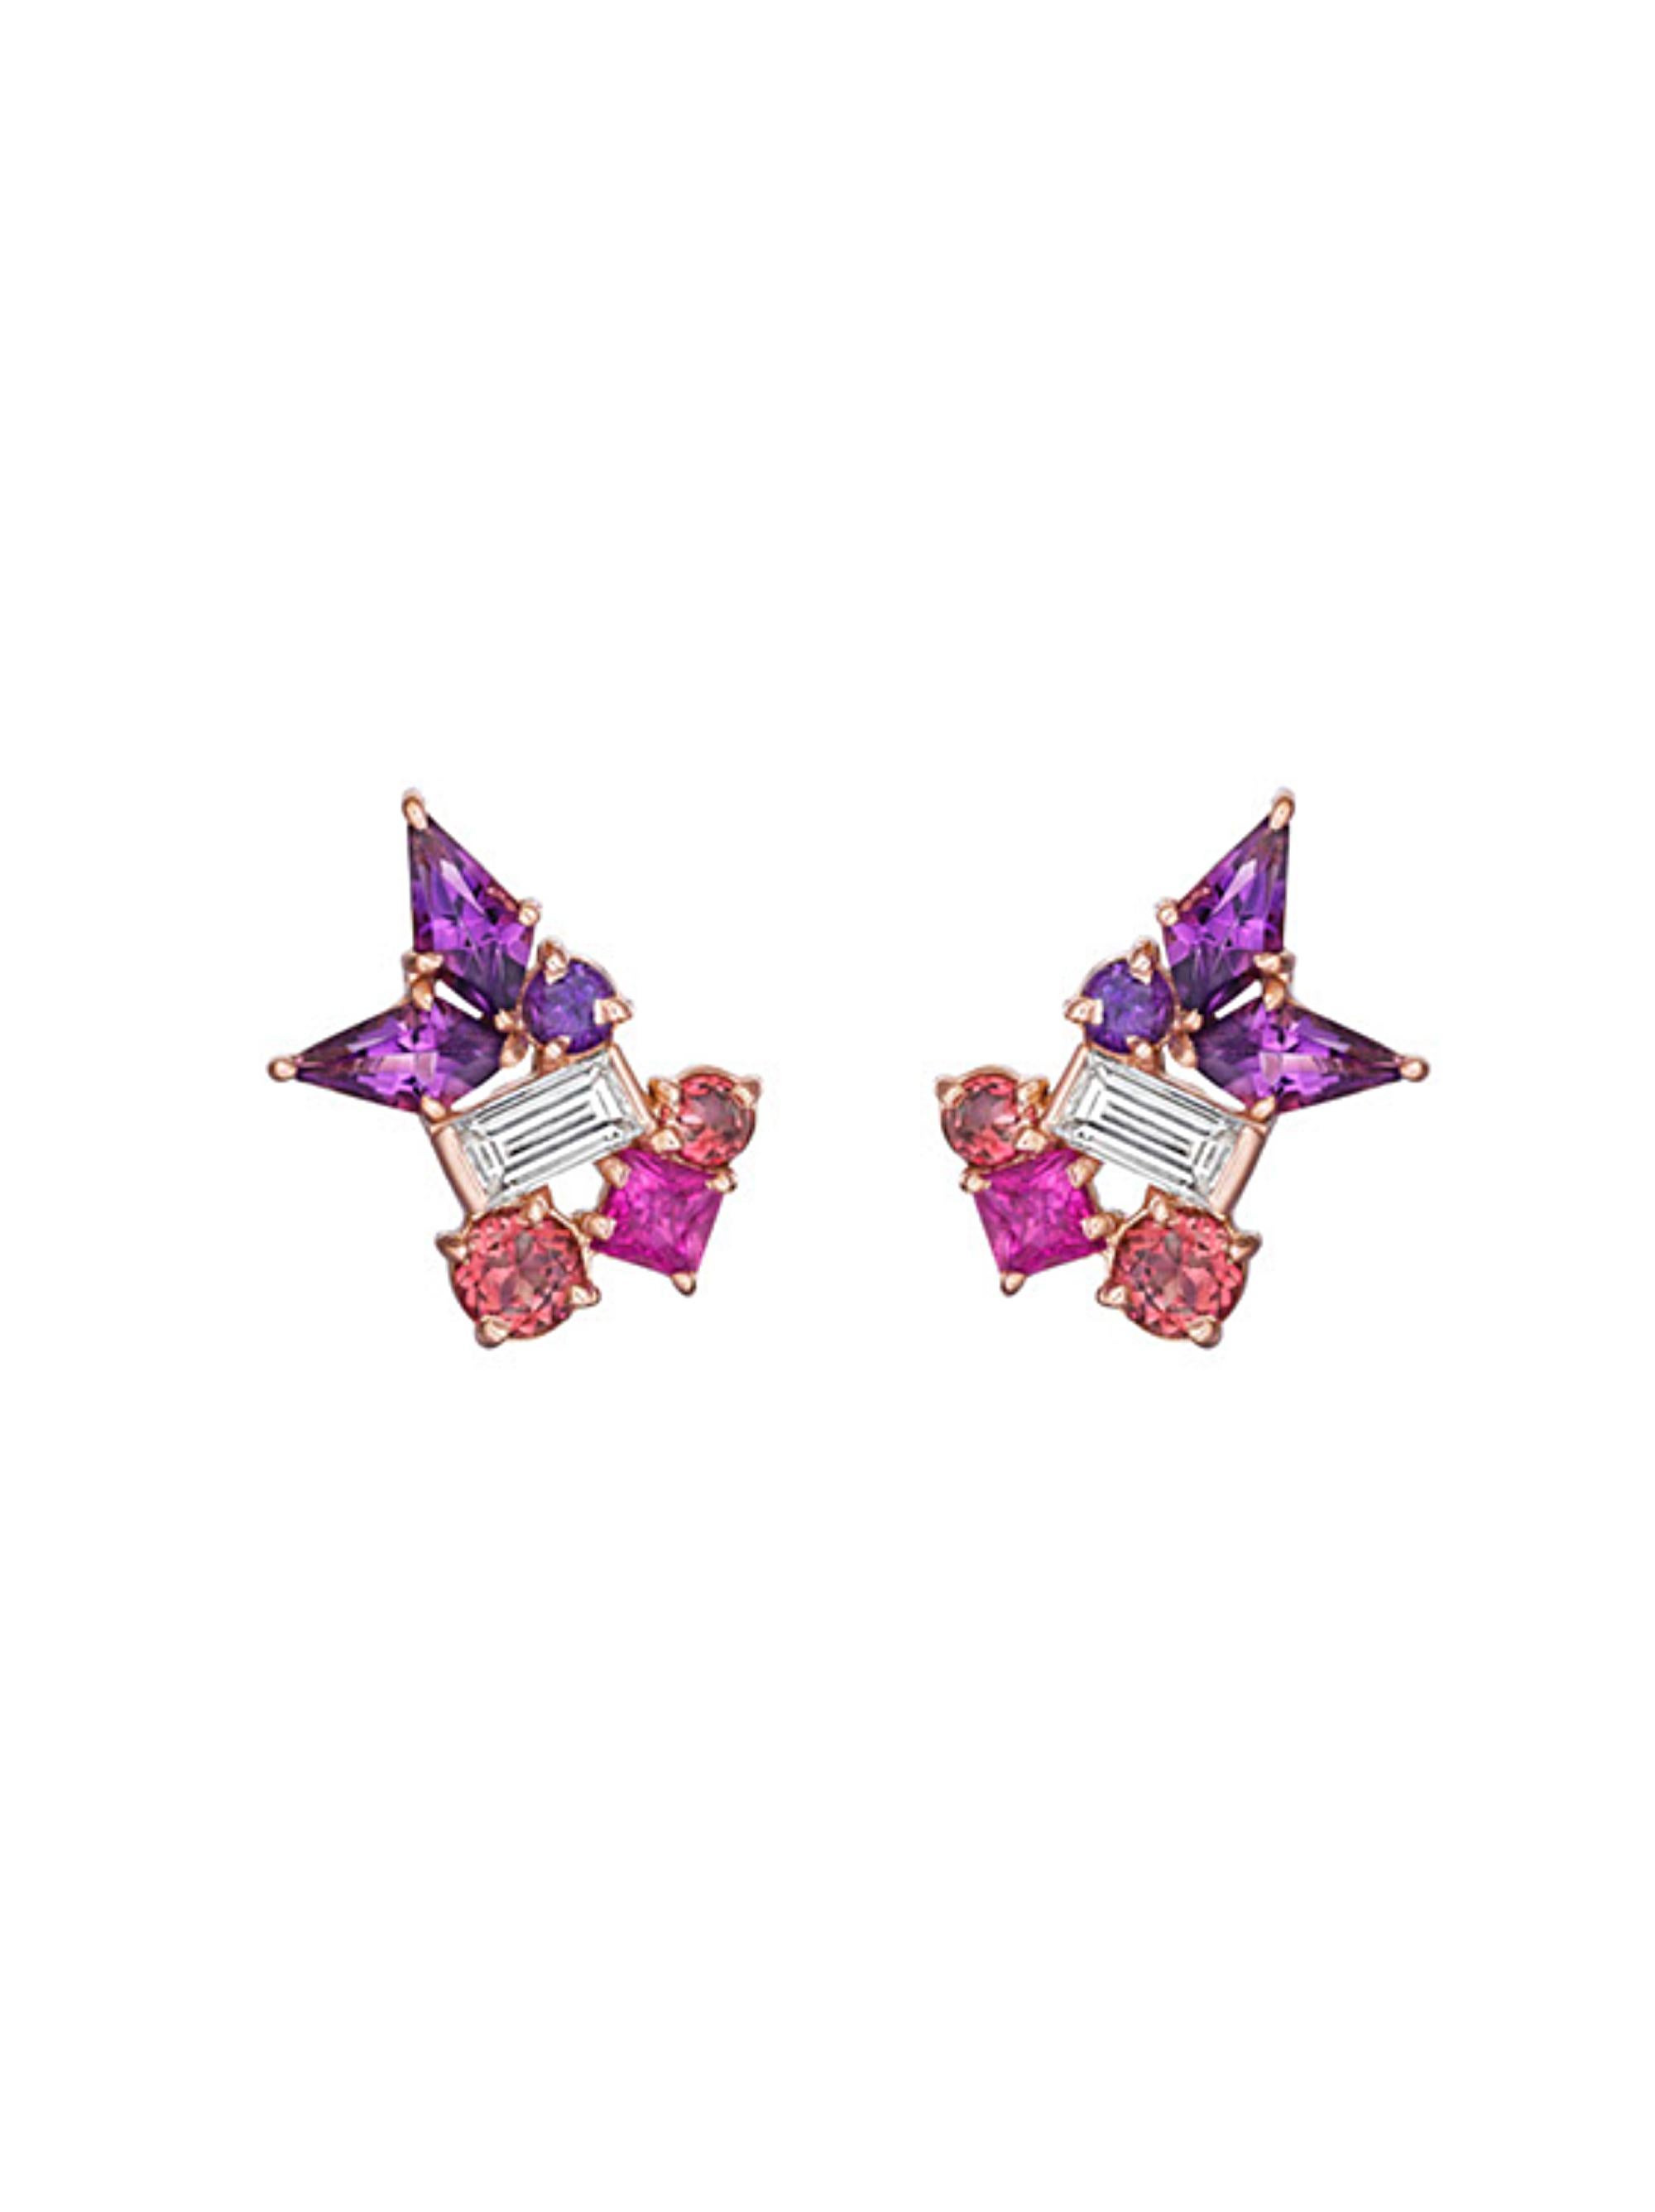 Artisan Melting Ice Amethyst and Pink Sapphire Earrings by MadStone For Sale